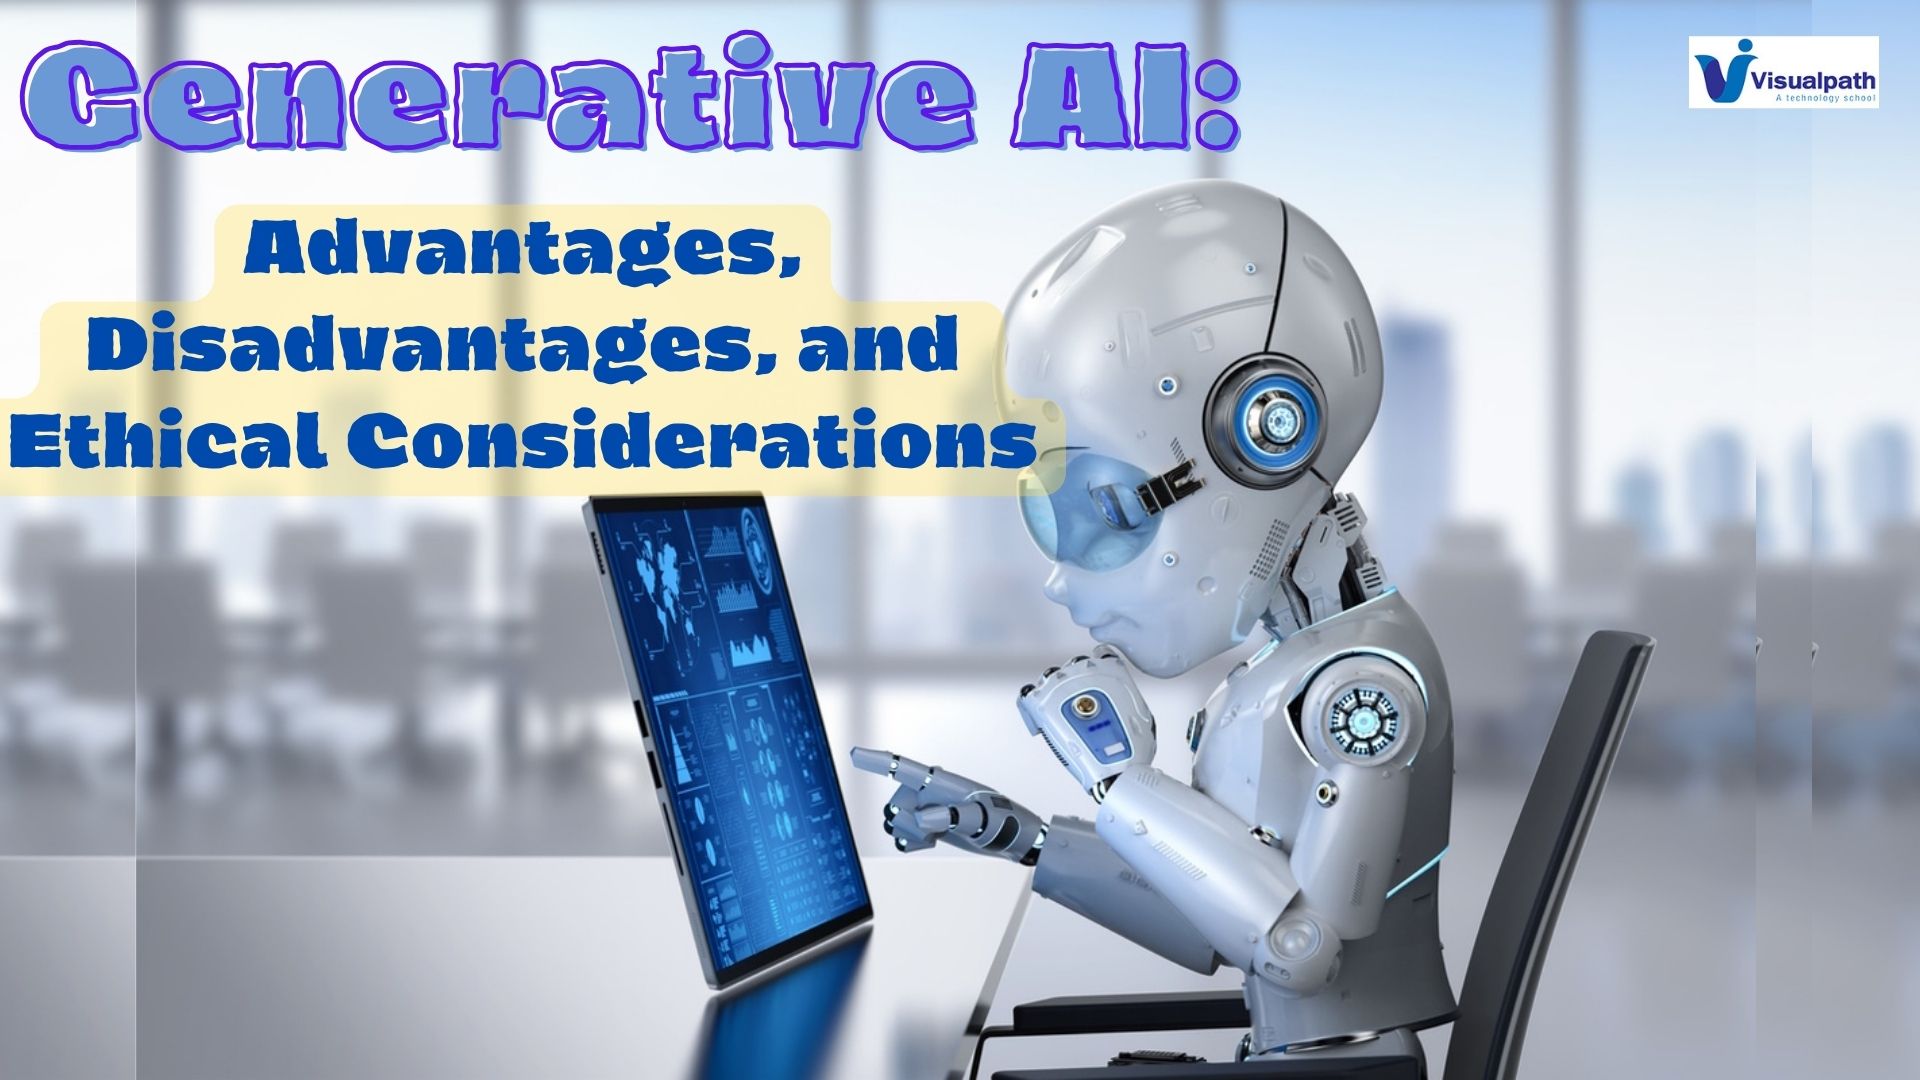 Generative AI: Advantages, Disadvantages, and Ethical Considerations